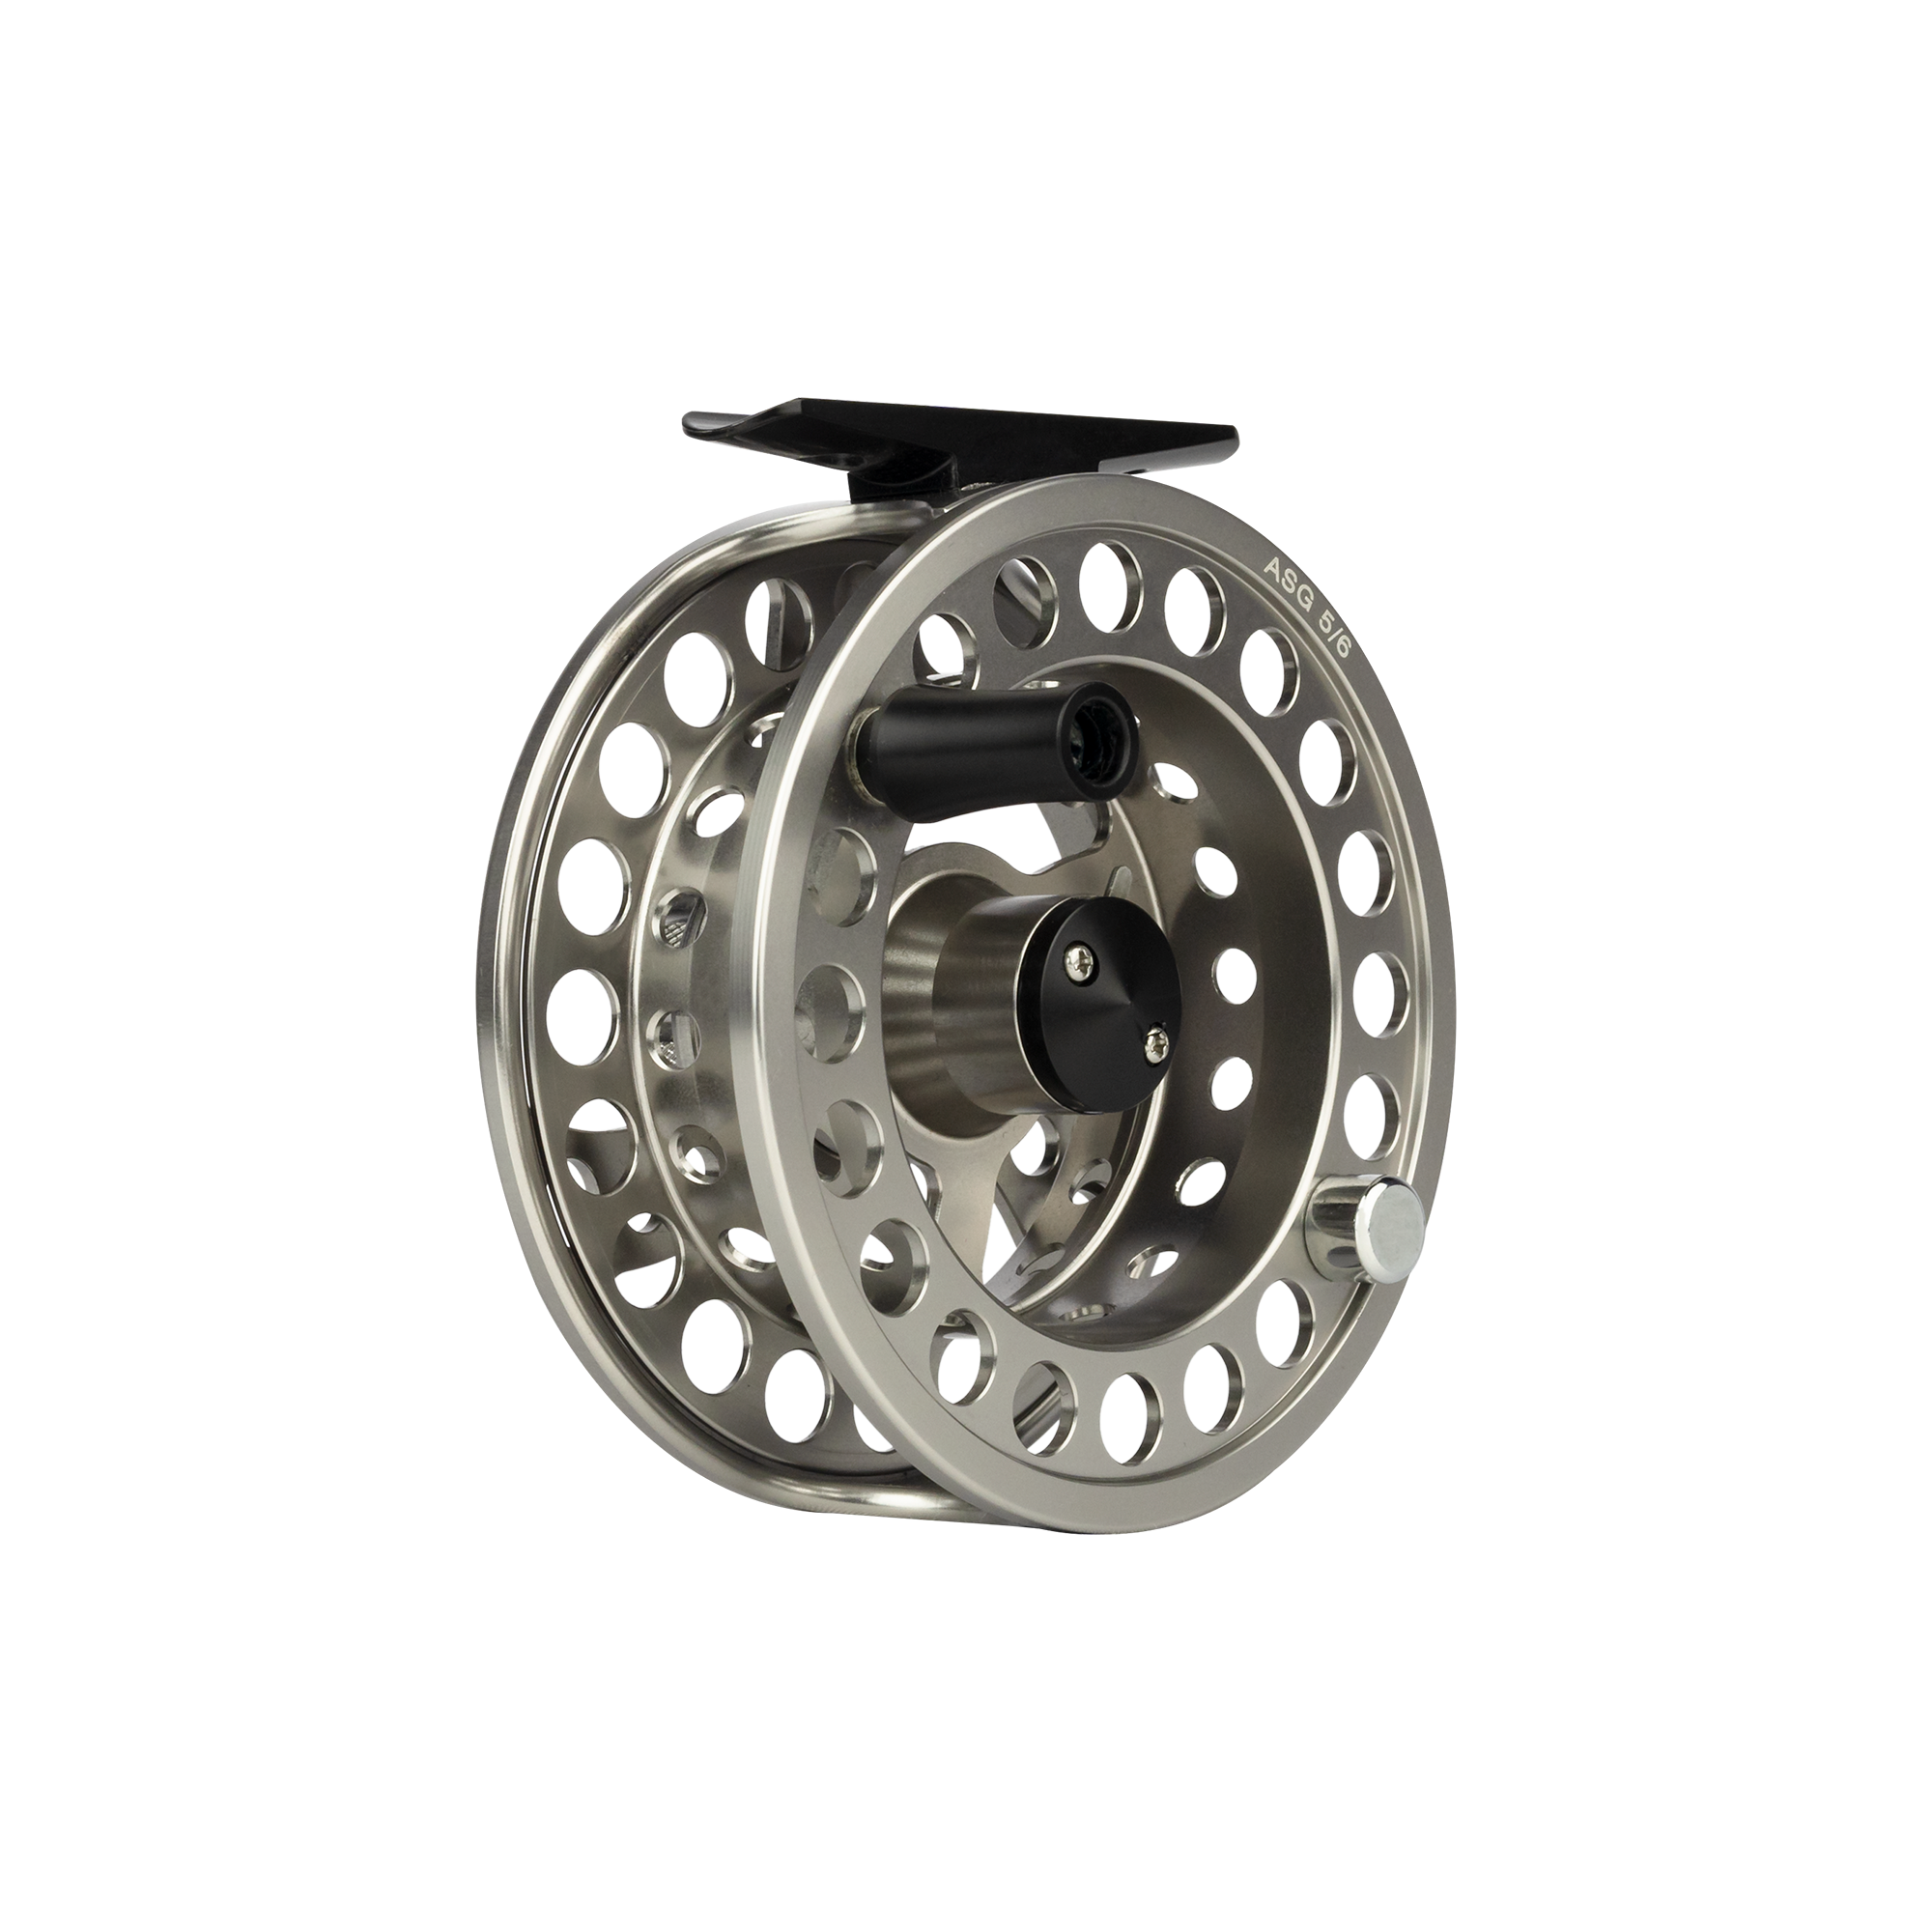 New Fly Reel with Rock Grain and Agate line Guard. (5/6 line wt